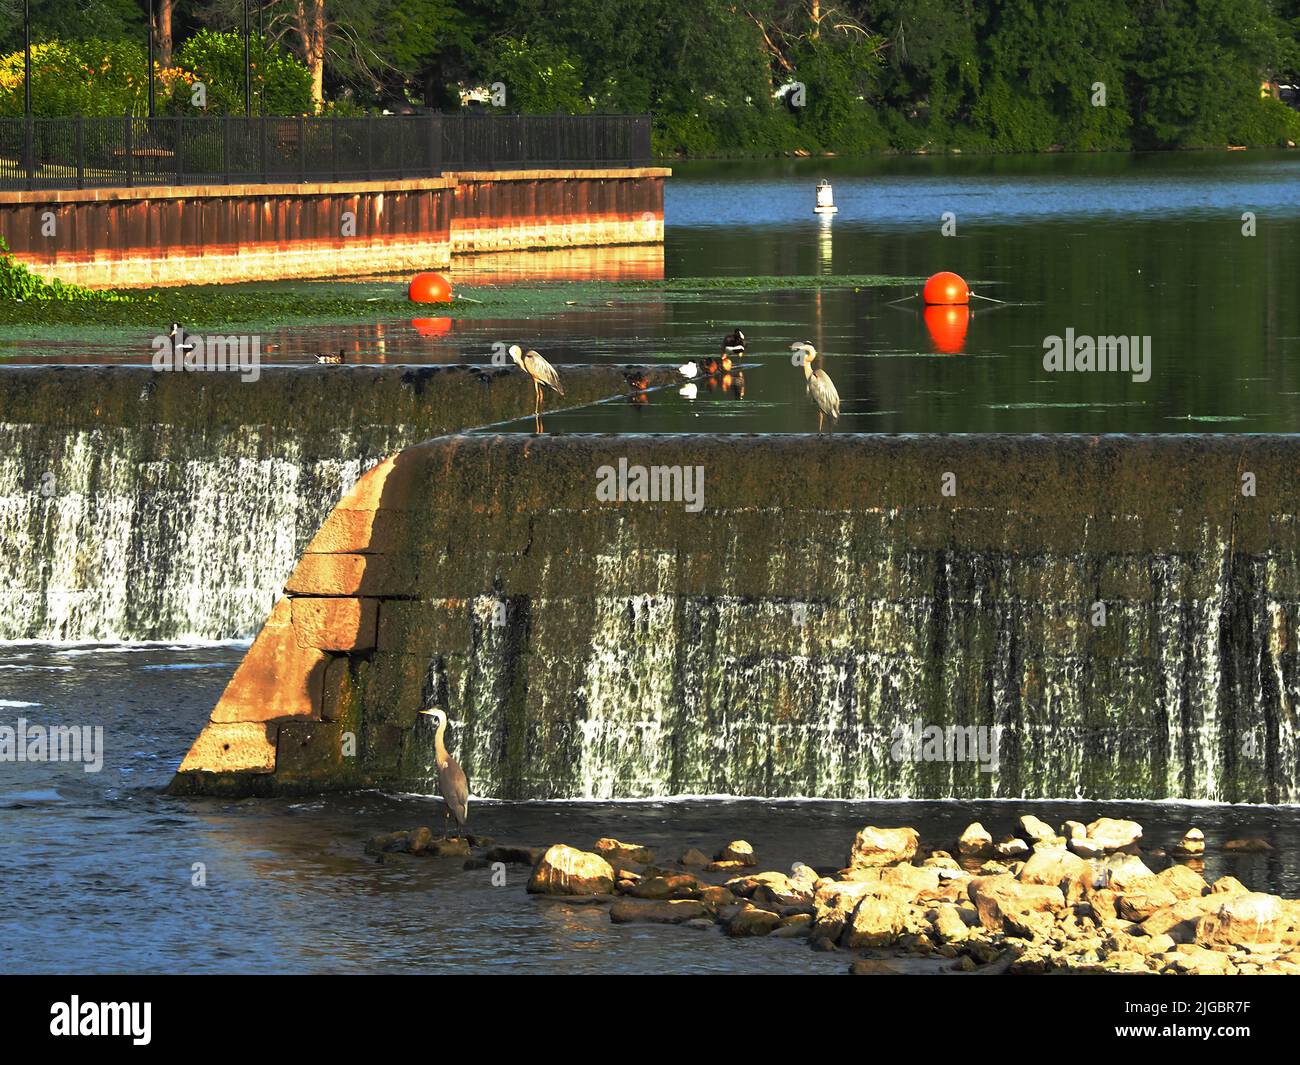 The Seneca River and dam in the village of Baldwinsville, New York Stock Photo